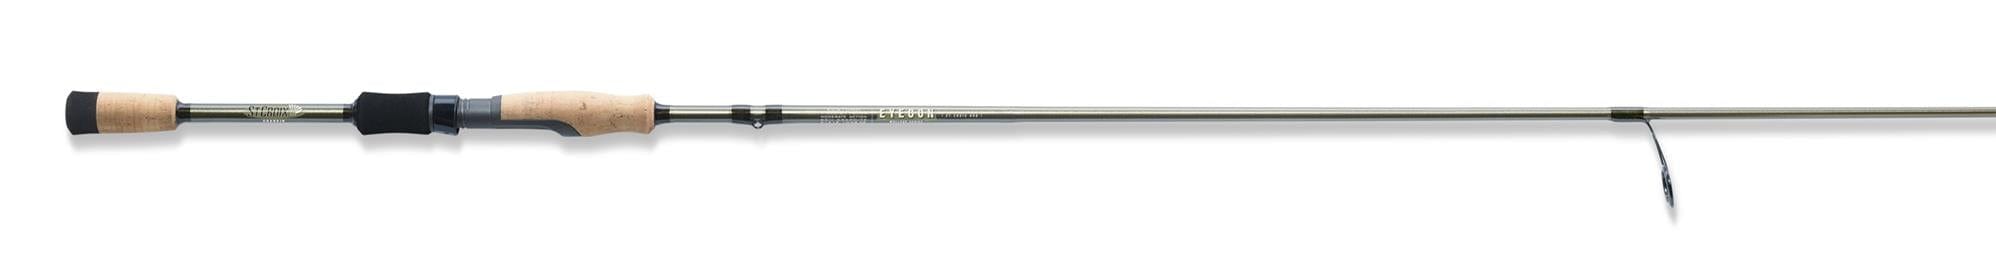 St.Croix Eyecon Spinning Rods, Fishing World